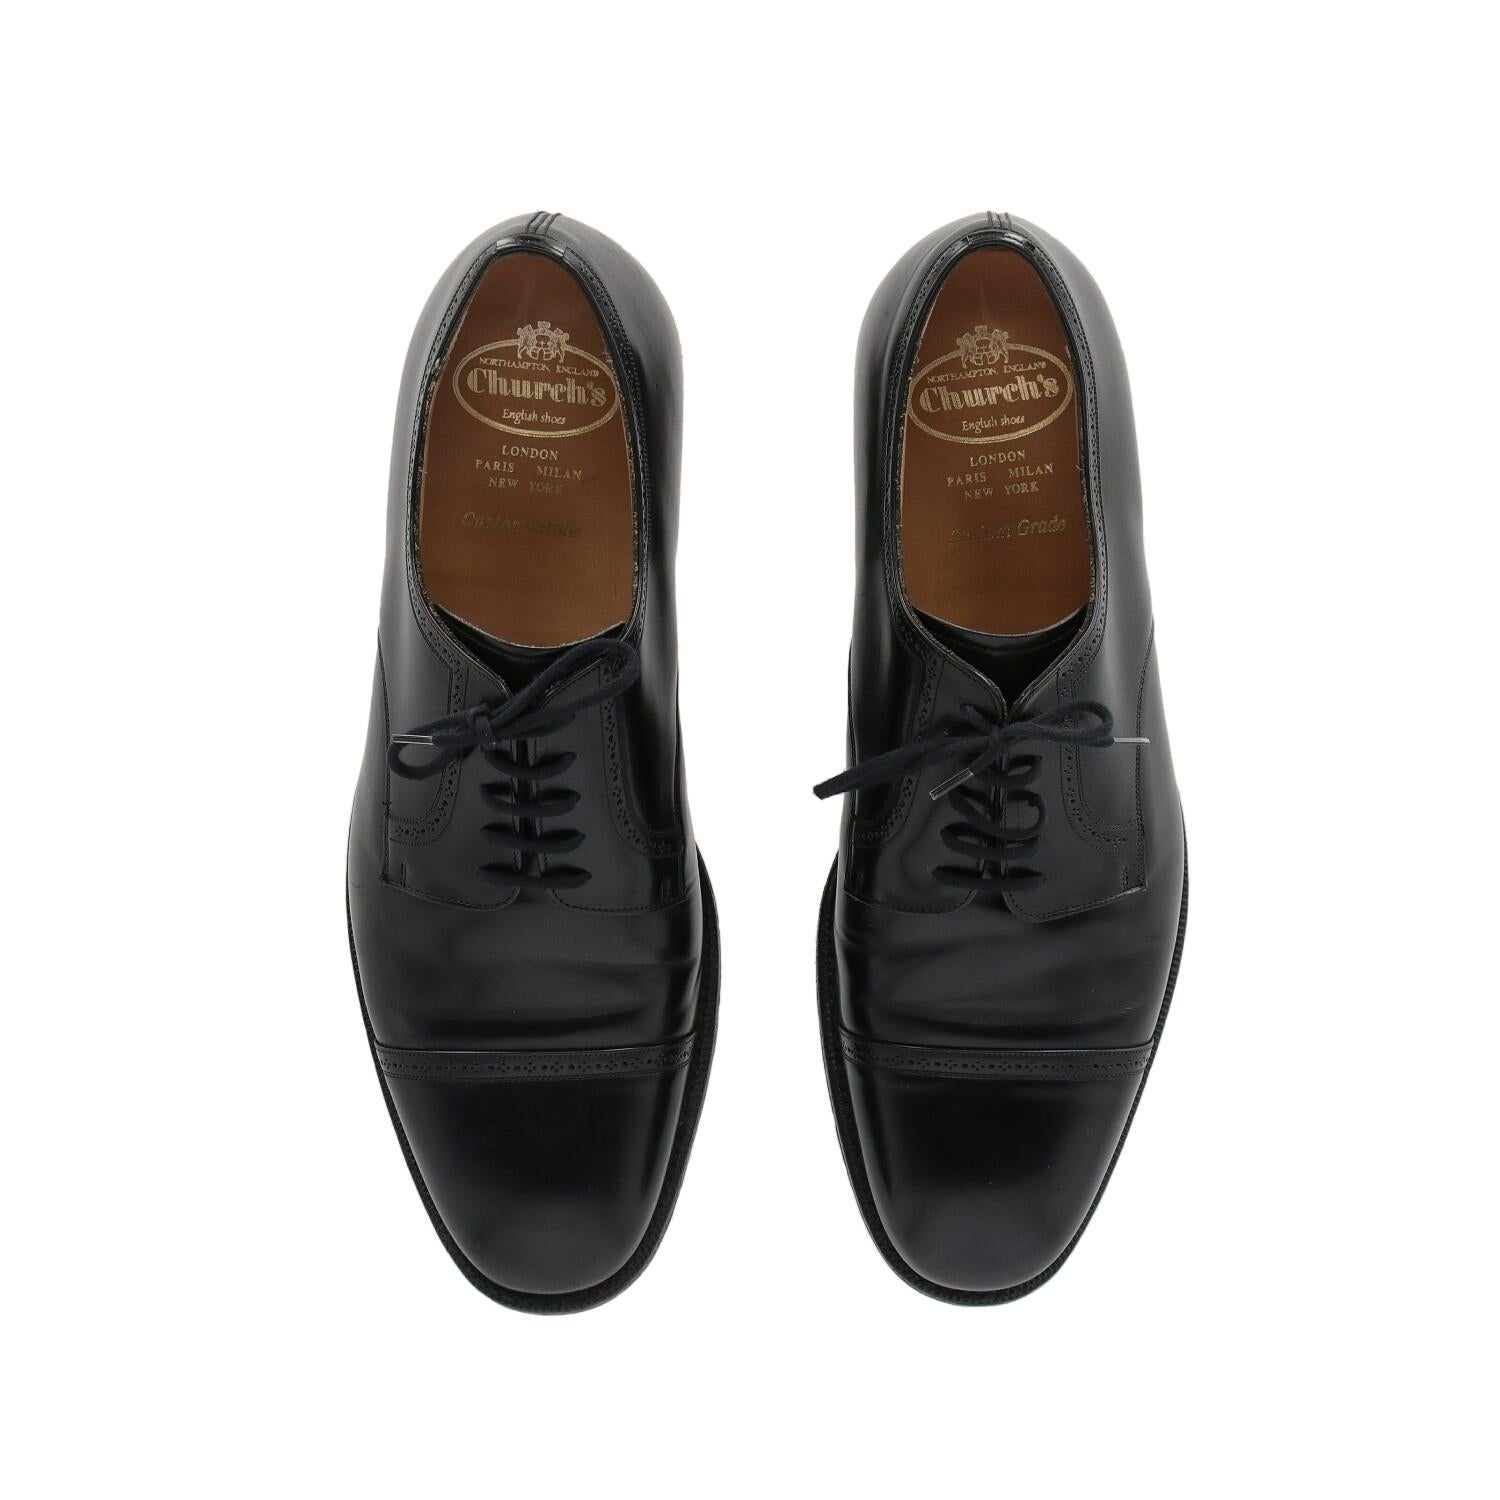 Men's 1990s Church's genuine black leather classic lace-up shoes